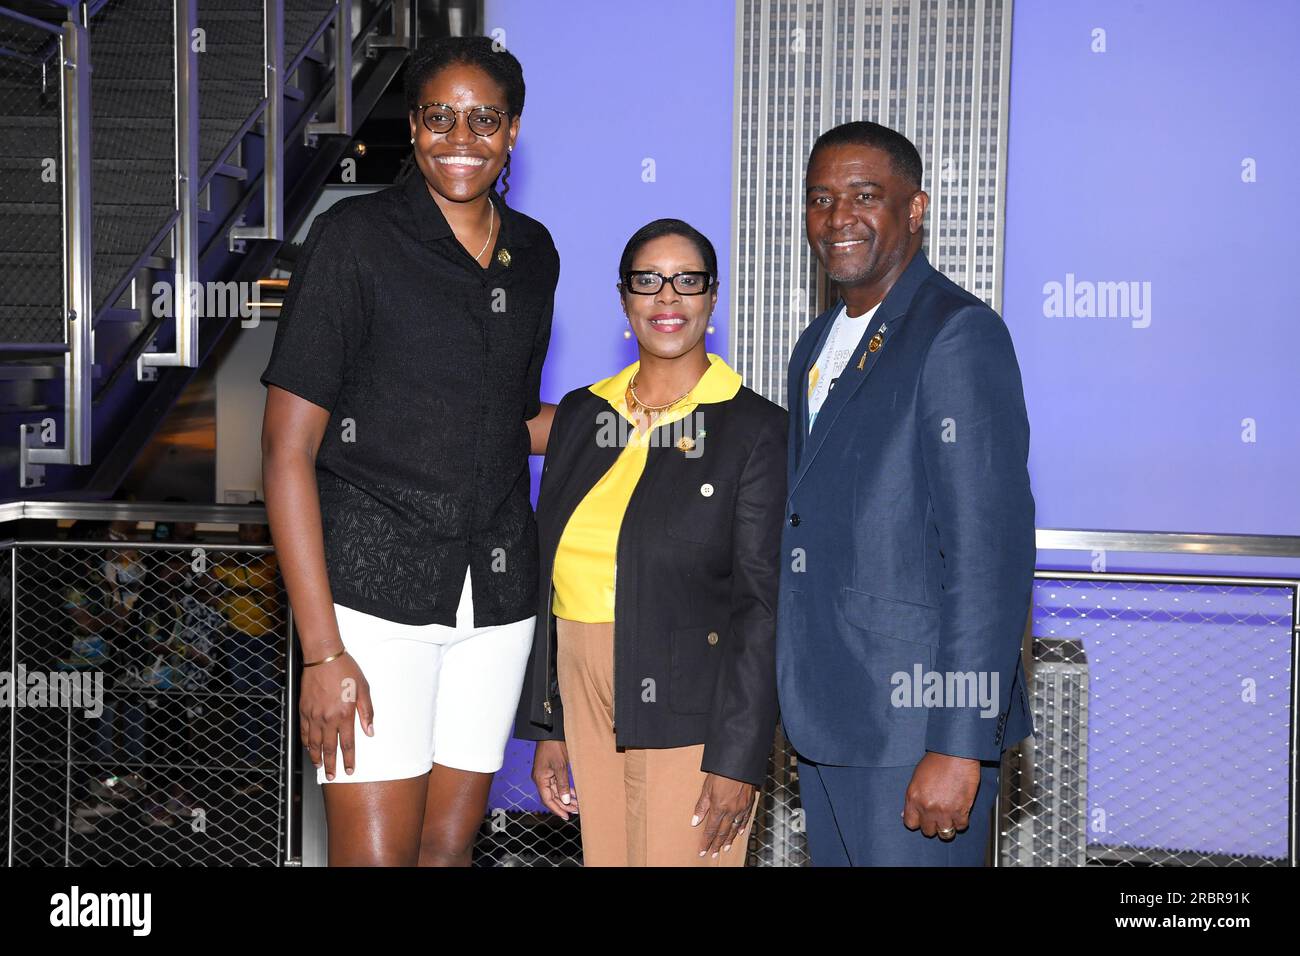 New York, USA. 10th July, 2023. Jonquel Jones, Valery Brown-Alce and Leroy F. Major visit the Empire State Building to celebrate the 50th Anniversary of Bahamas Independence Day in New York, NY on July 10, 2023. (Photo by Efren Landaos/Sipa USA) Credit: Sipa USA/Alamy Live News Stock Photo